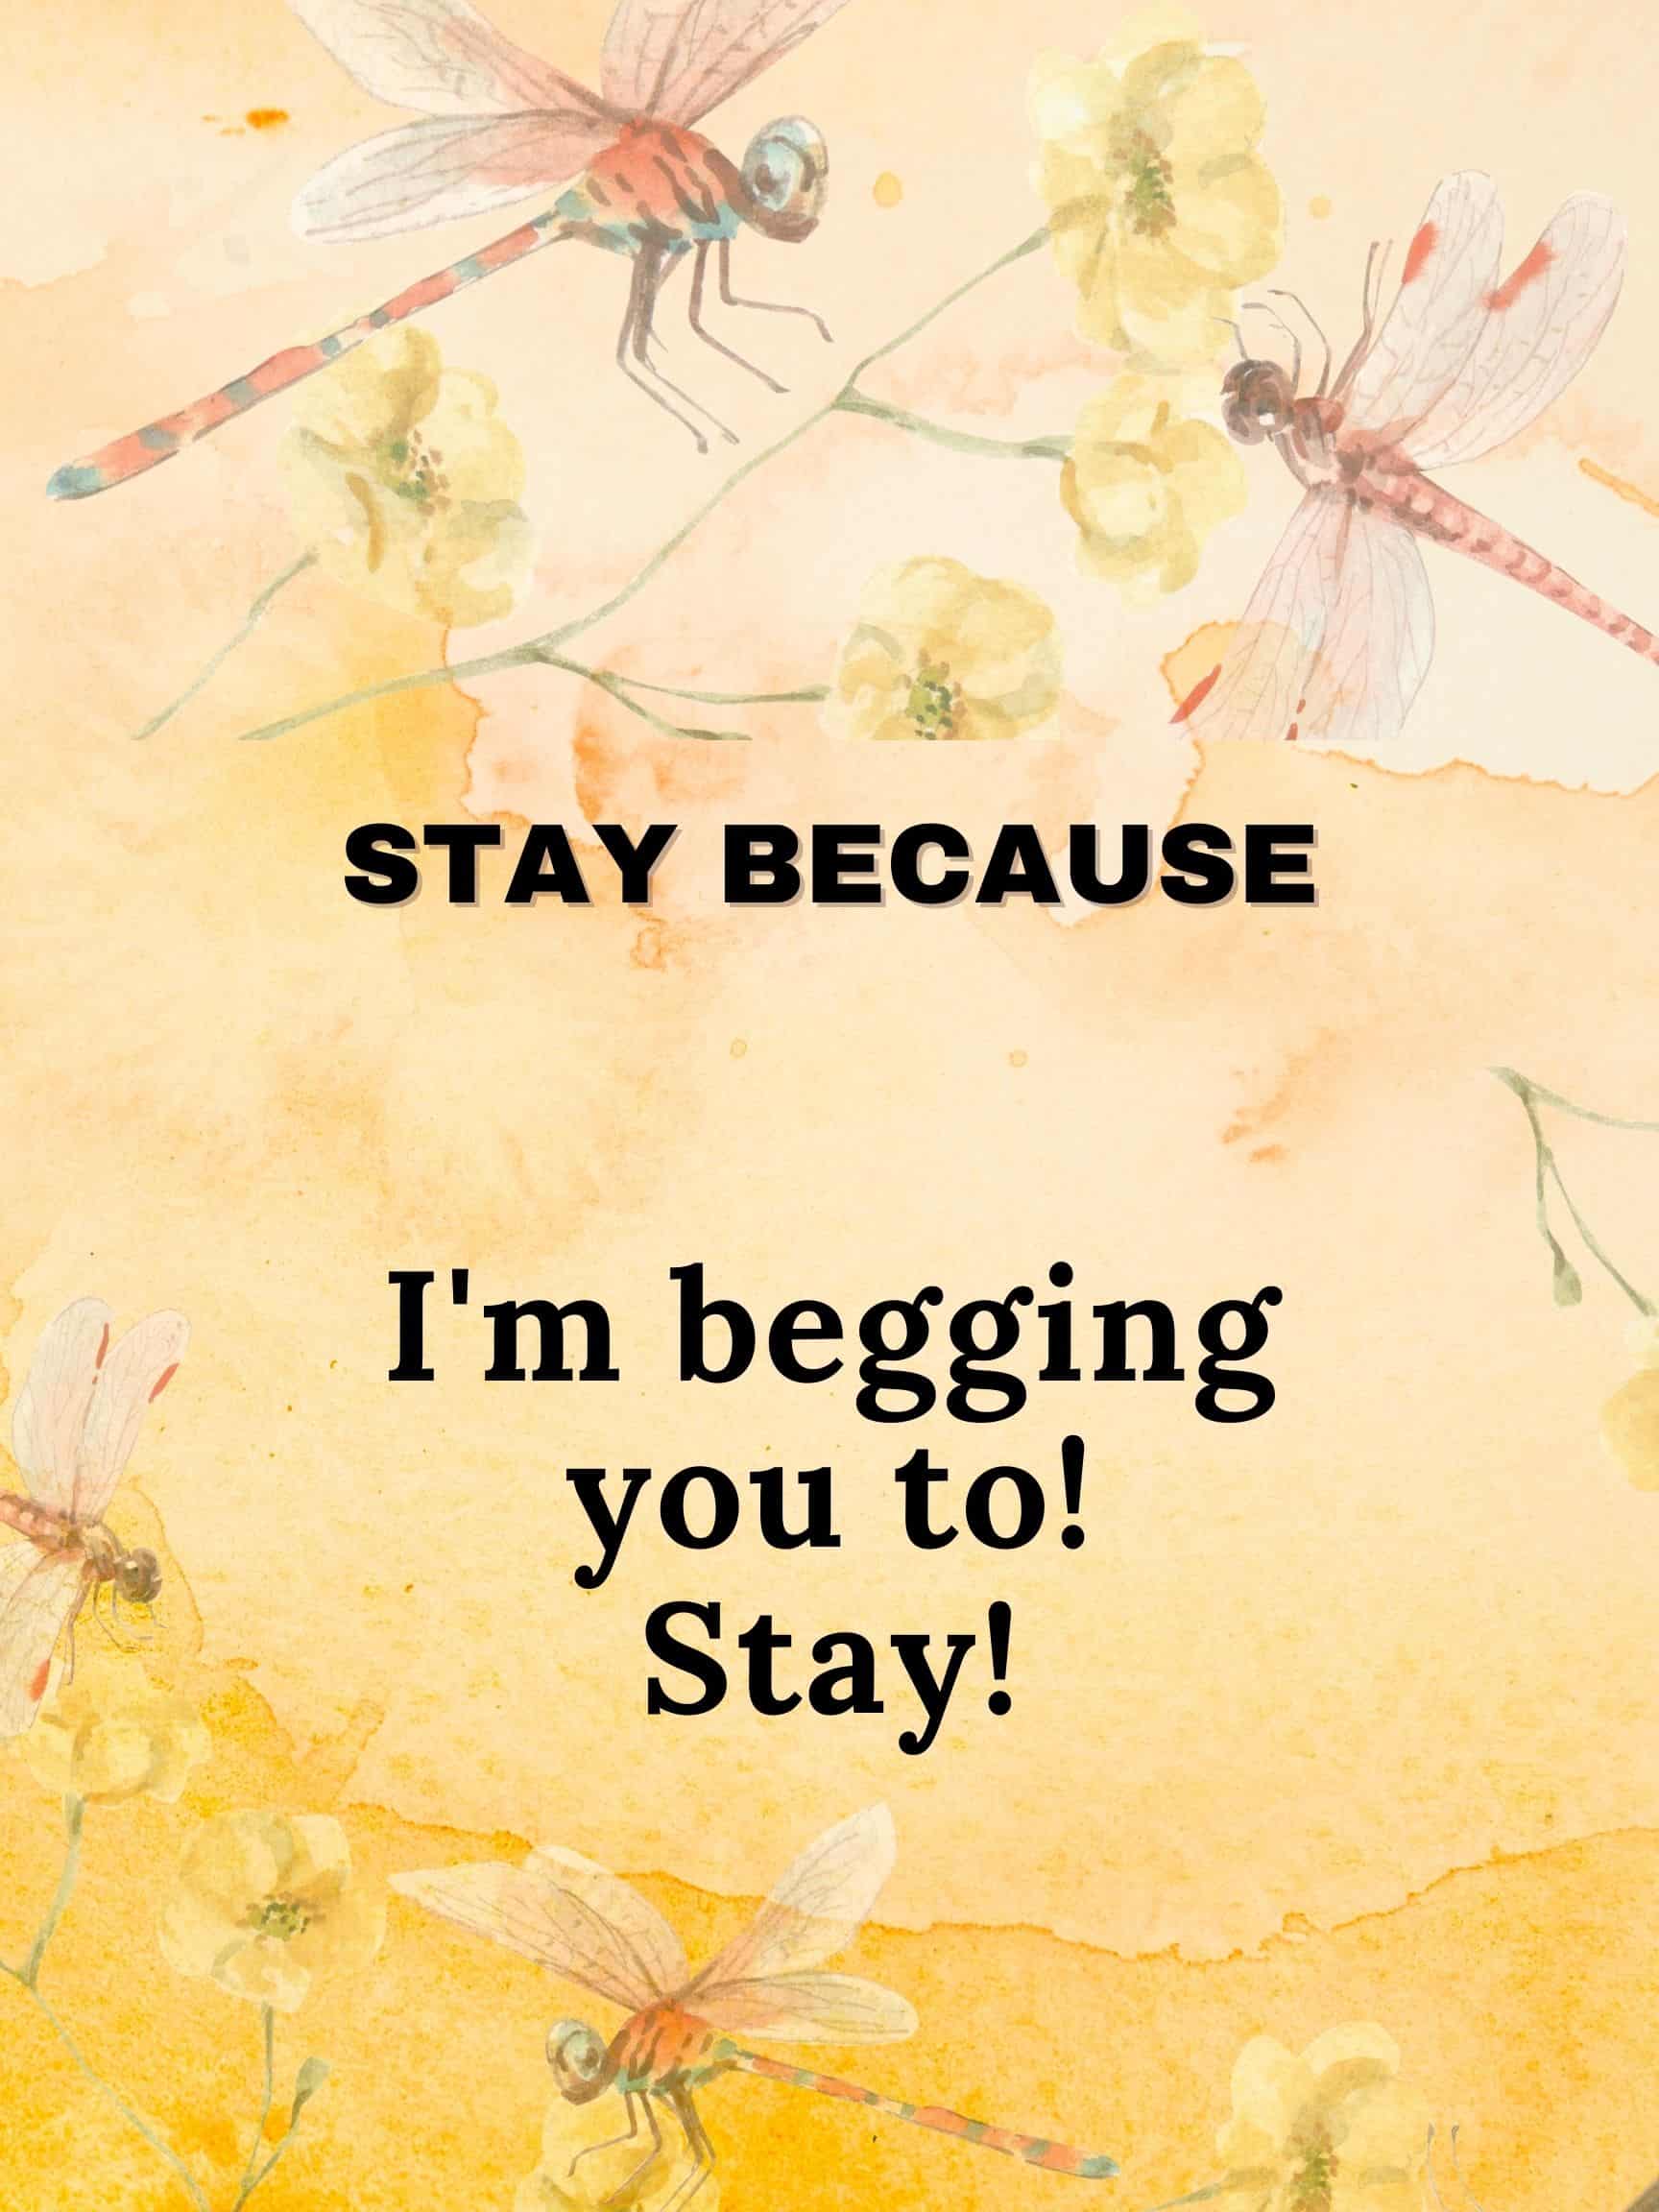 Stay because I'm begging you to stay. #StayBecause